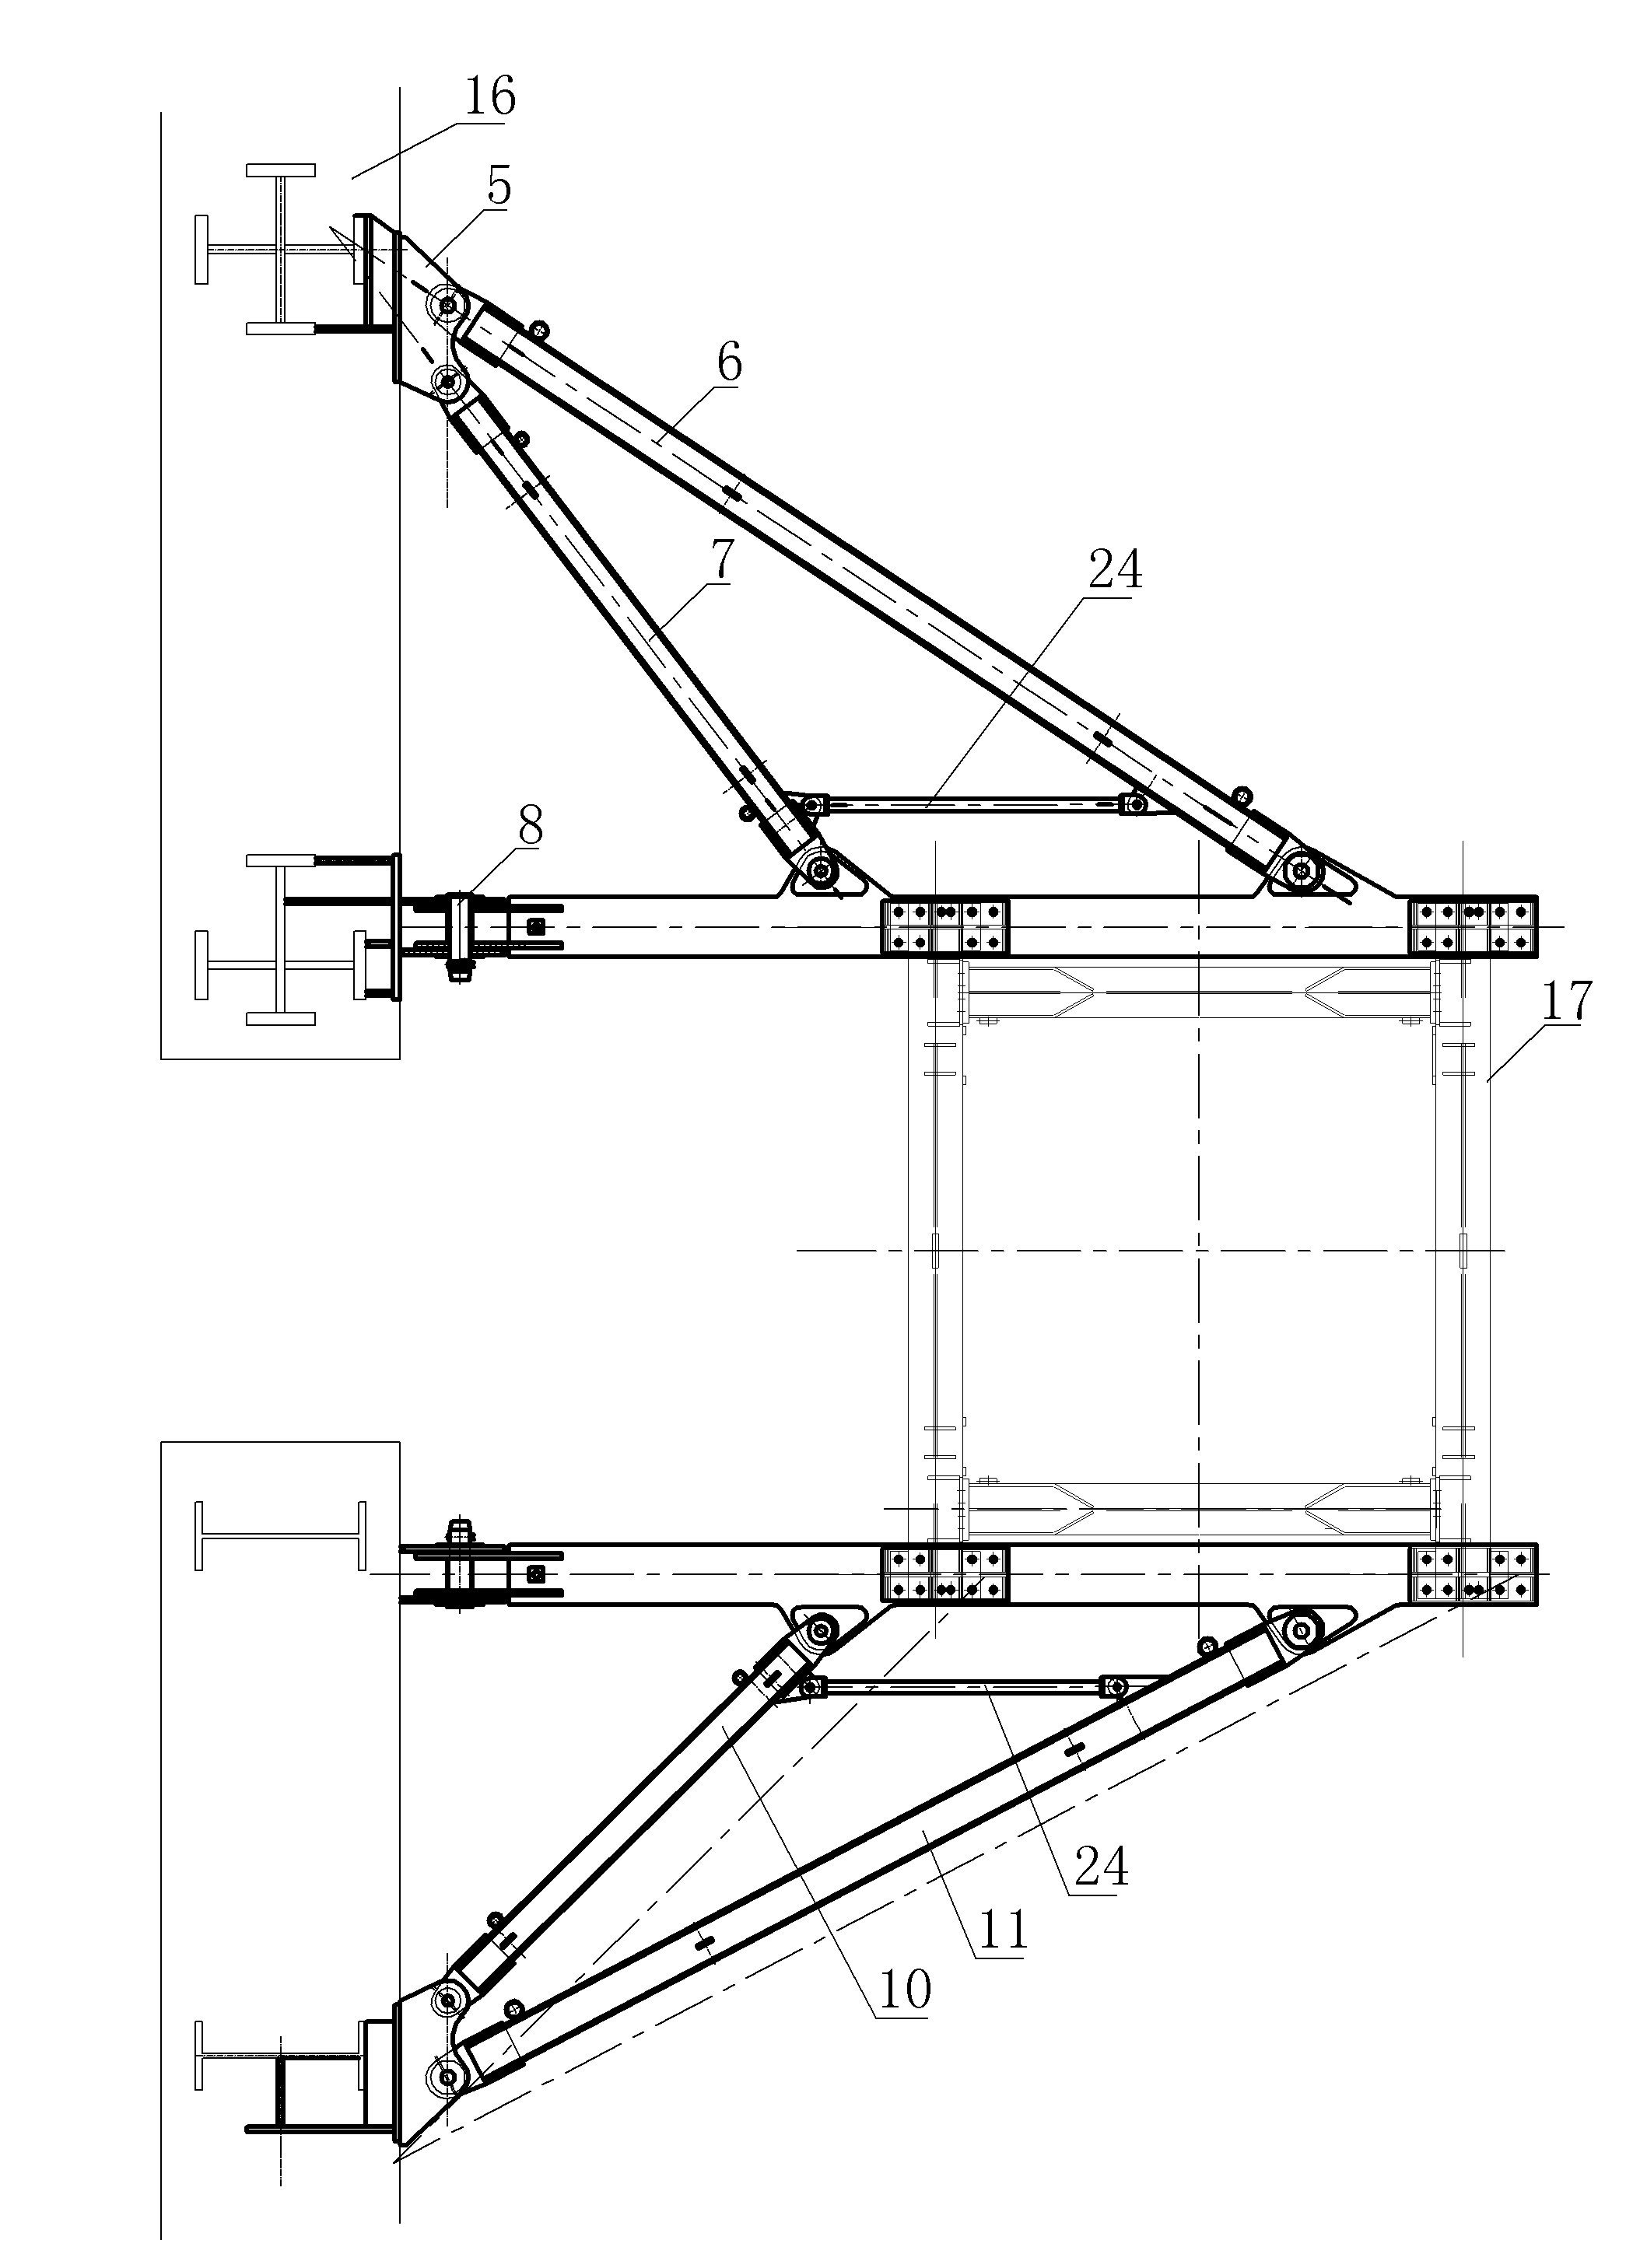 Suspended-rising support system of tower crane